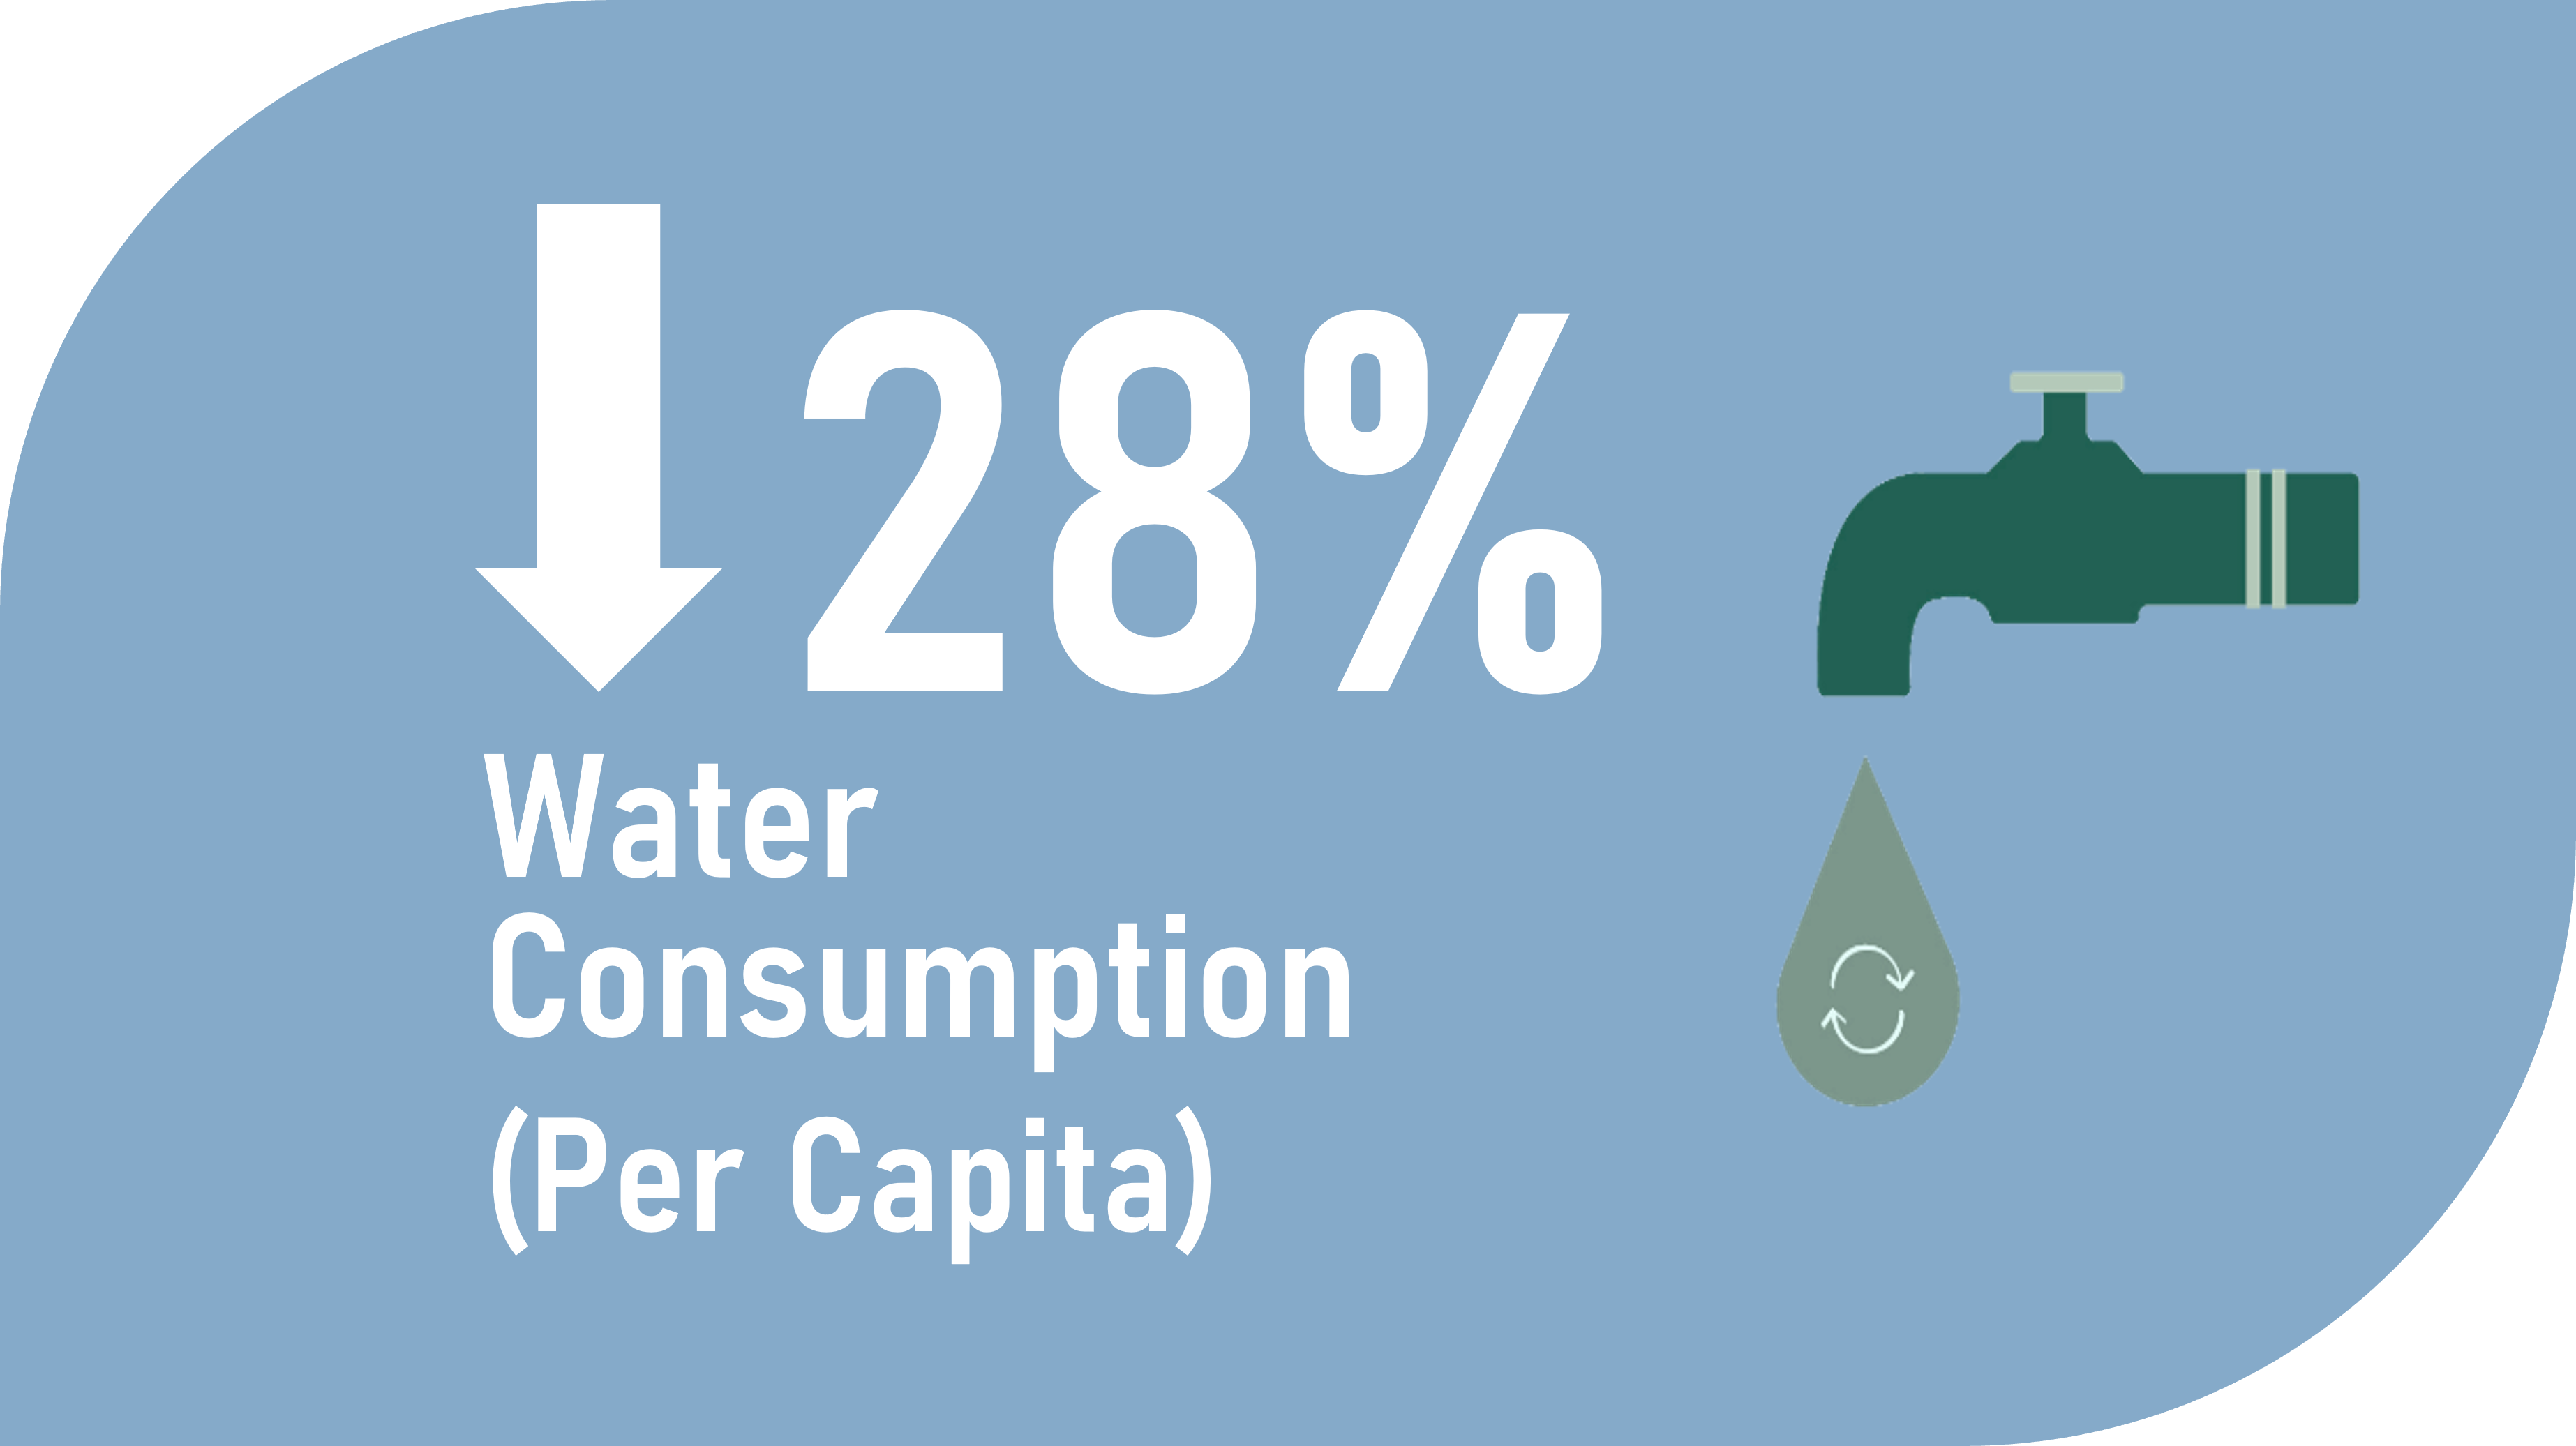 Water Consumption Performance in 2022-23